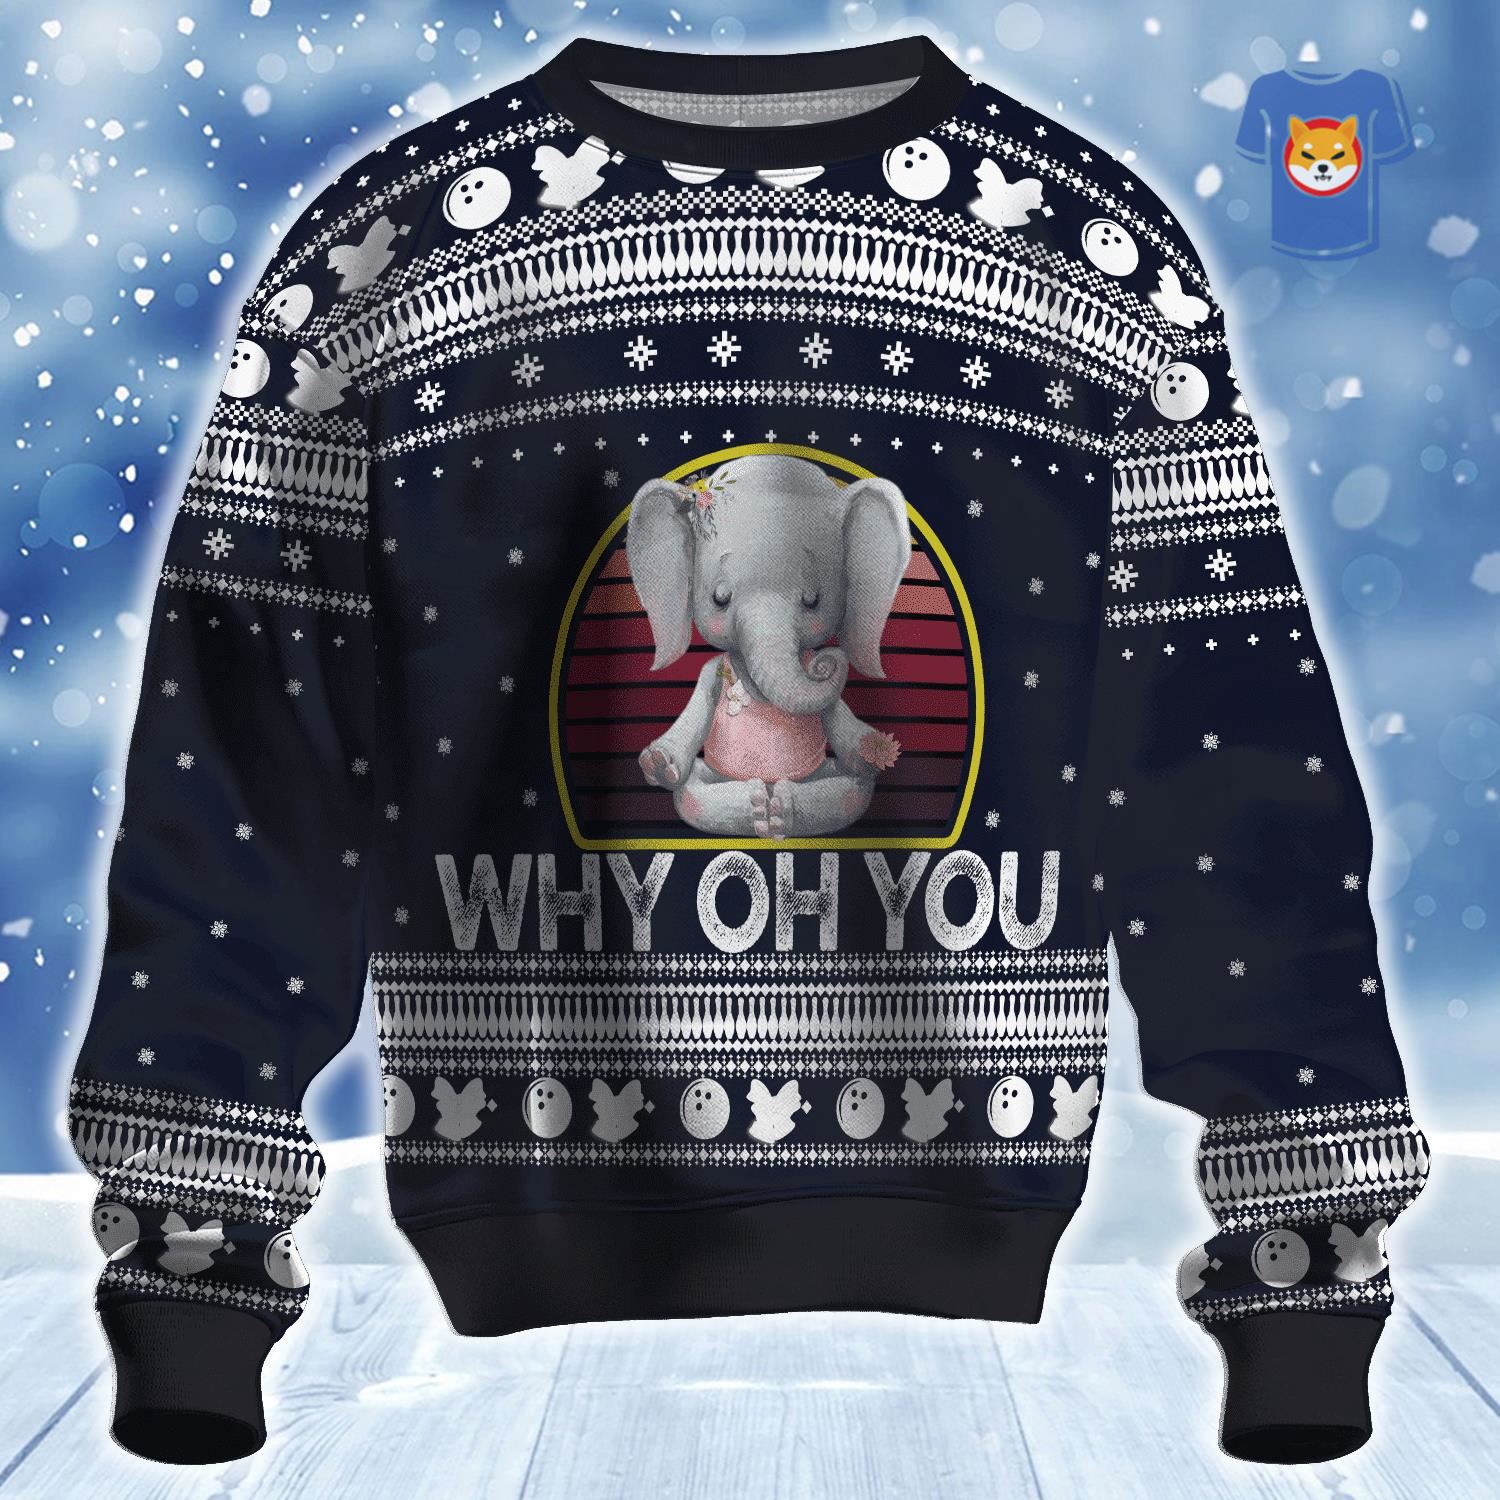 Why Oh You Ugly Christmas Sweater 